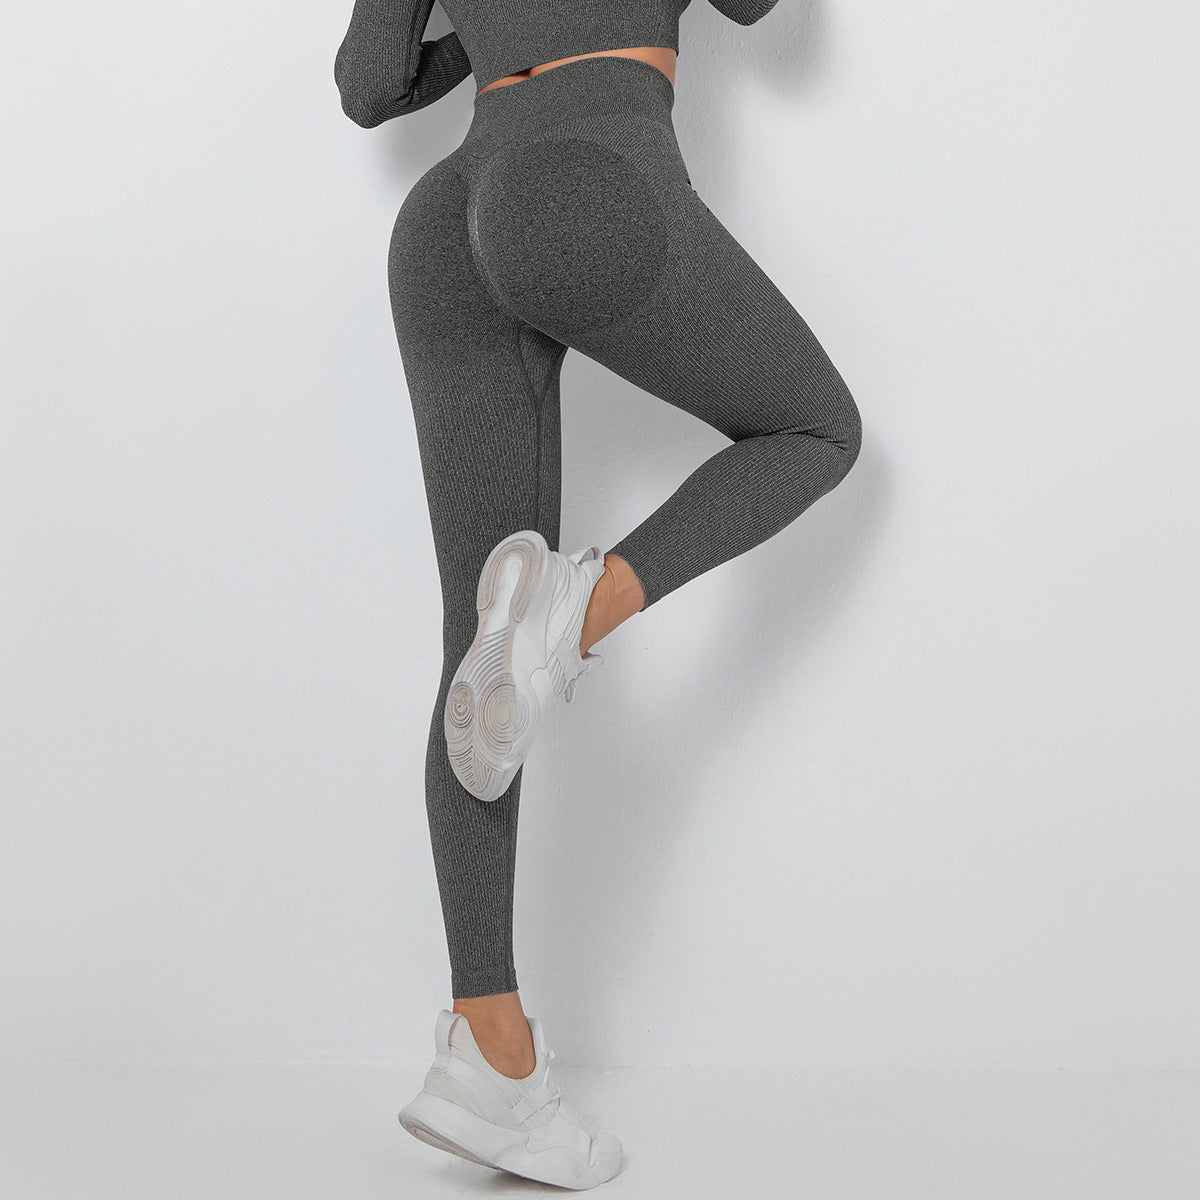 Seamless Knitted Thread Moisture Wicking Yoga Pants Exercise Workout Pants Sexy Peach Hip Tight Leggings